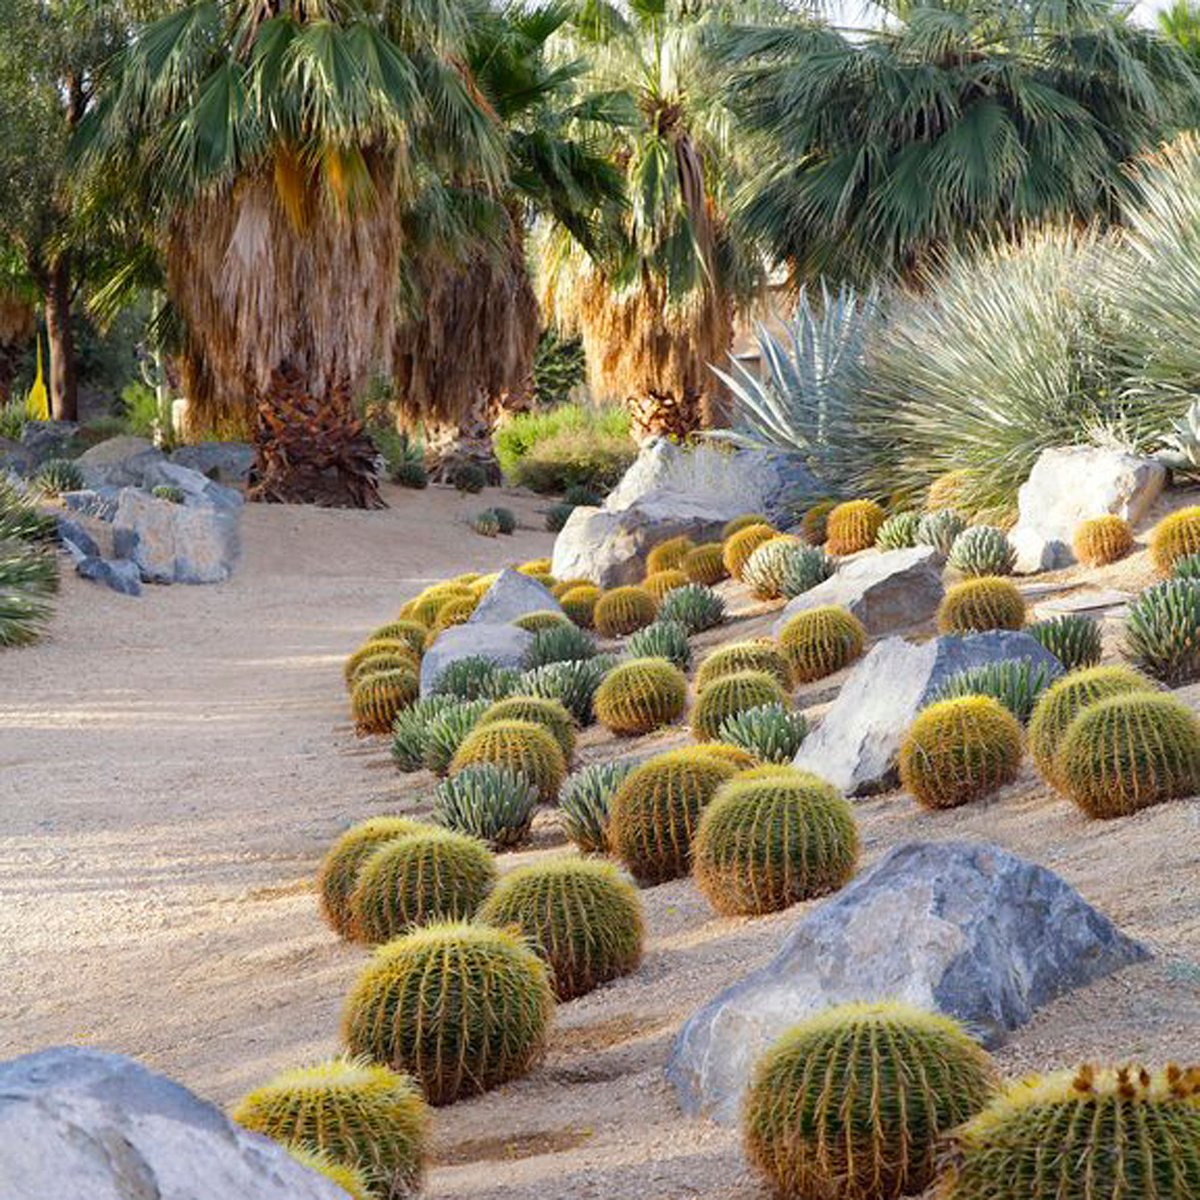 What a breathtaking desert garden scene! 🌵🏜️ Could this be a part of a botanical garden or a showcase by a landscaping company? Let your imagination wander...

#DesertGarden #BotanicalGarden #LandscapingCompany #NatureLovers #OutdoorDesign